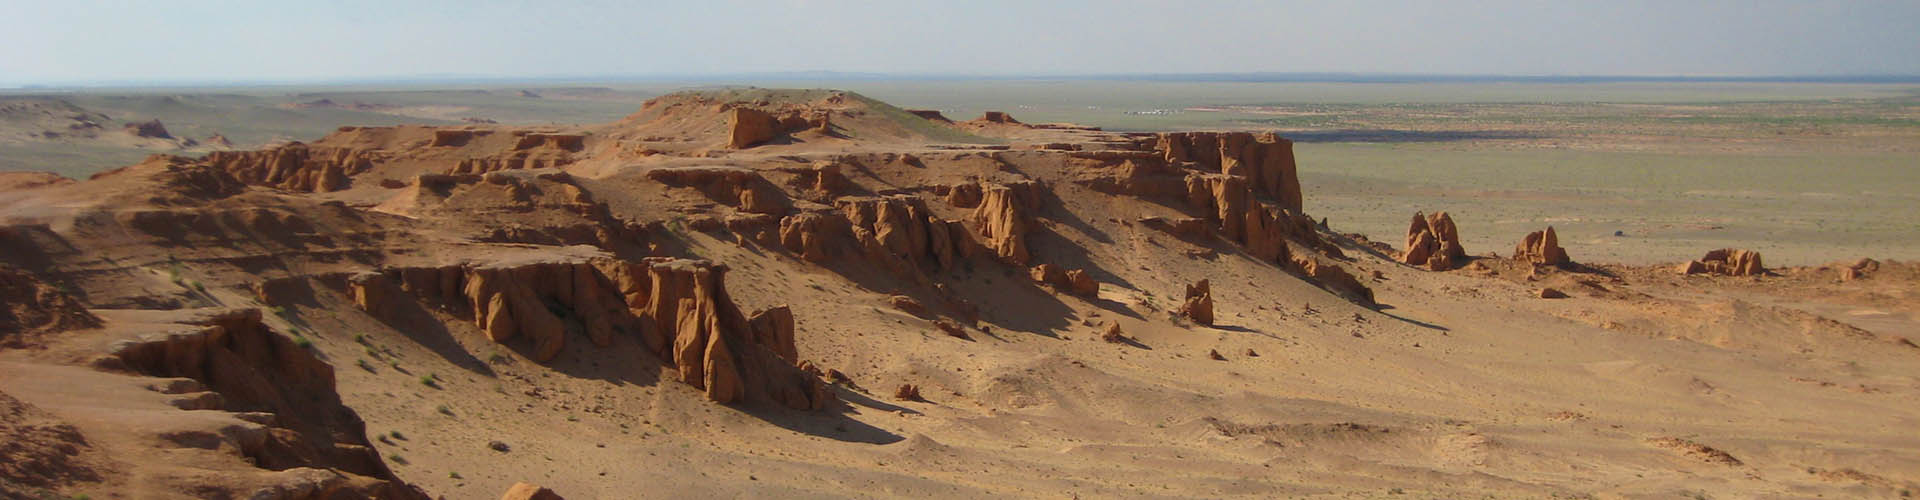 Voyage Mongolie